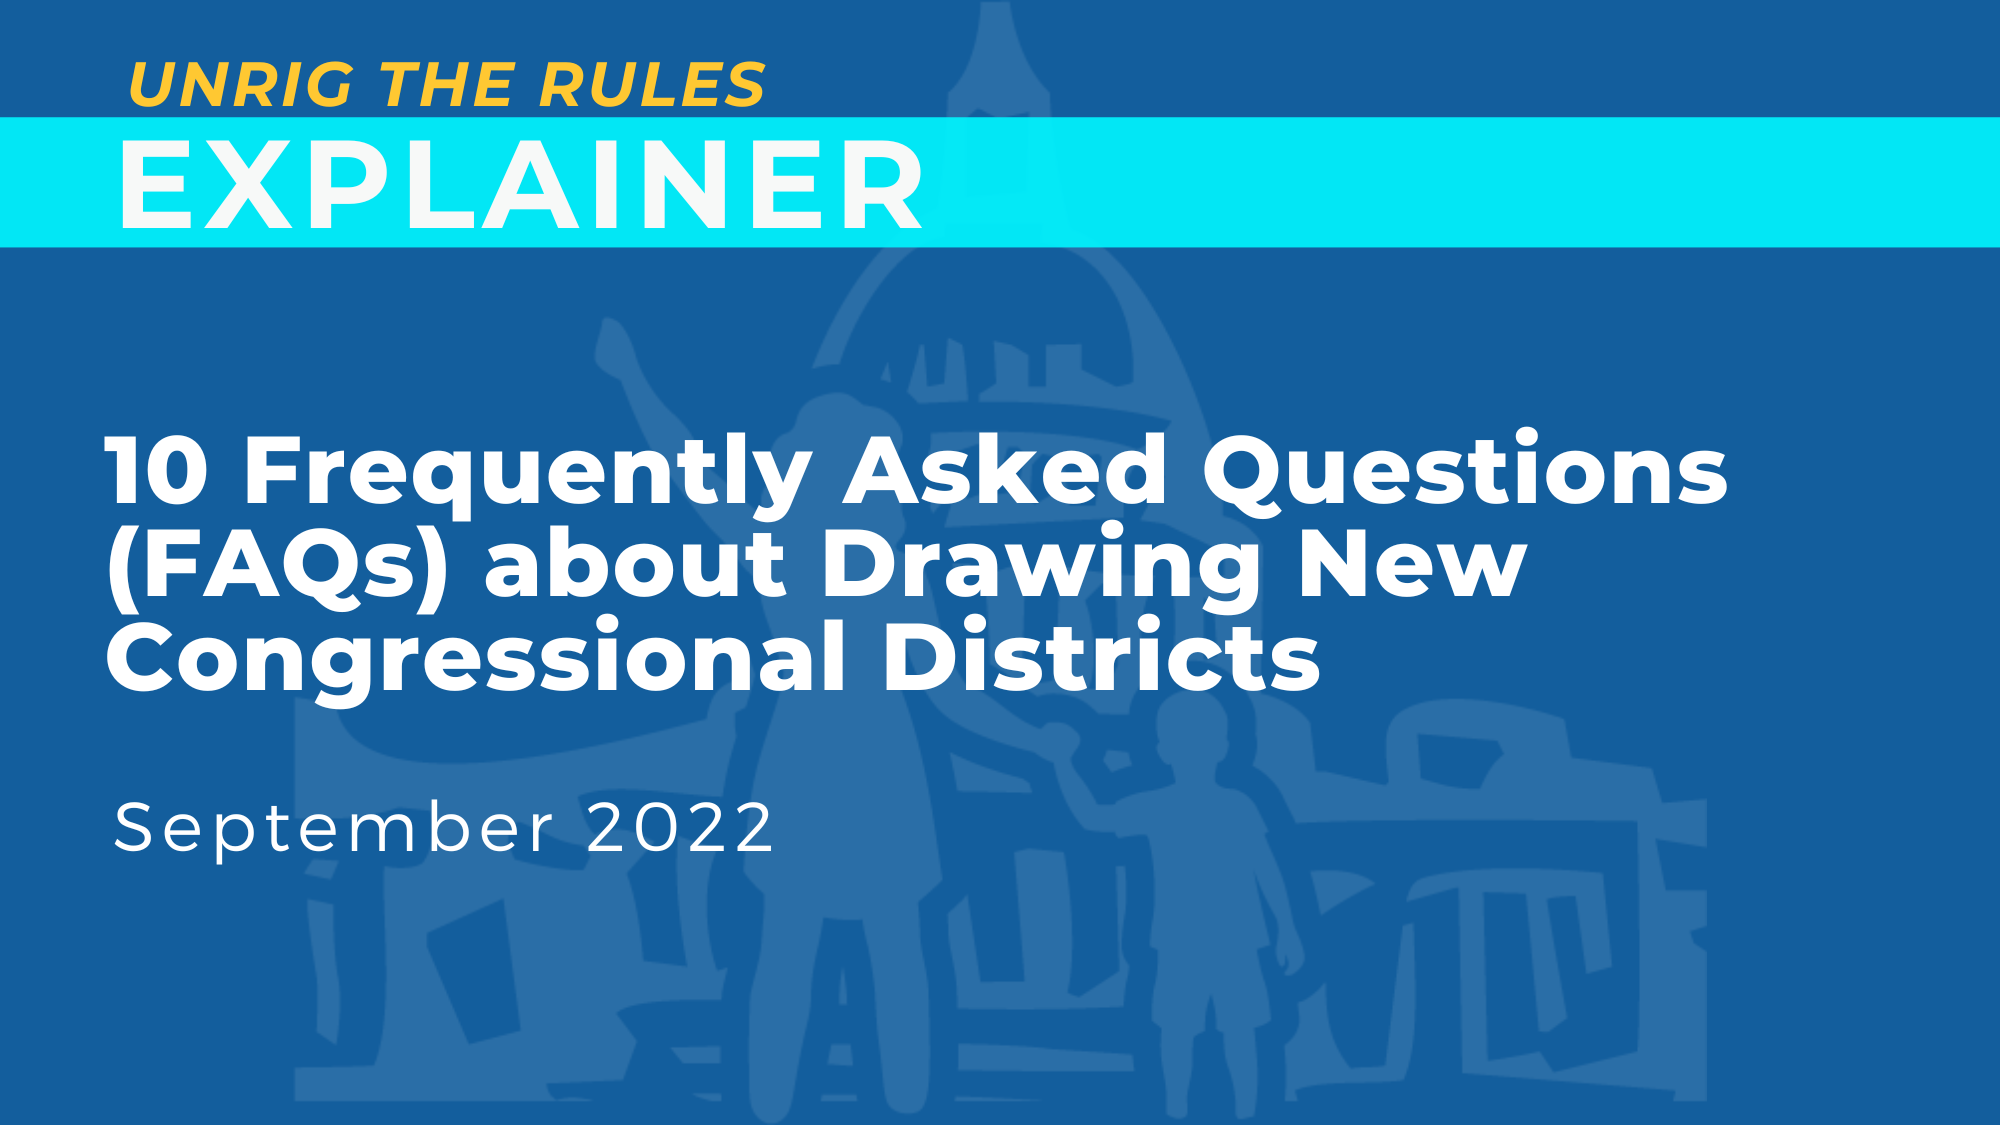 10 Frequently Asked Questions (FAQs) about Drawing New Congressional Districts